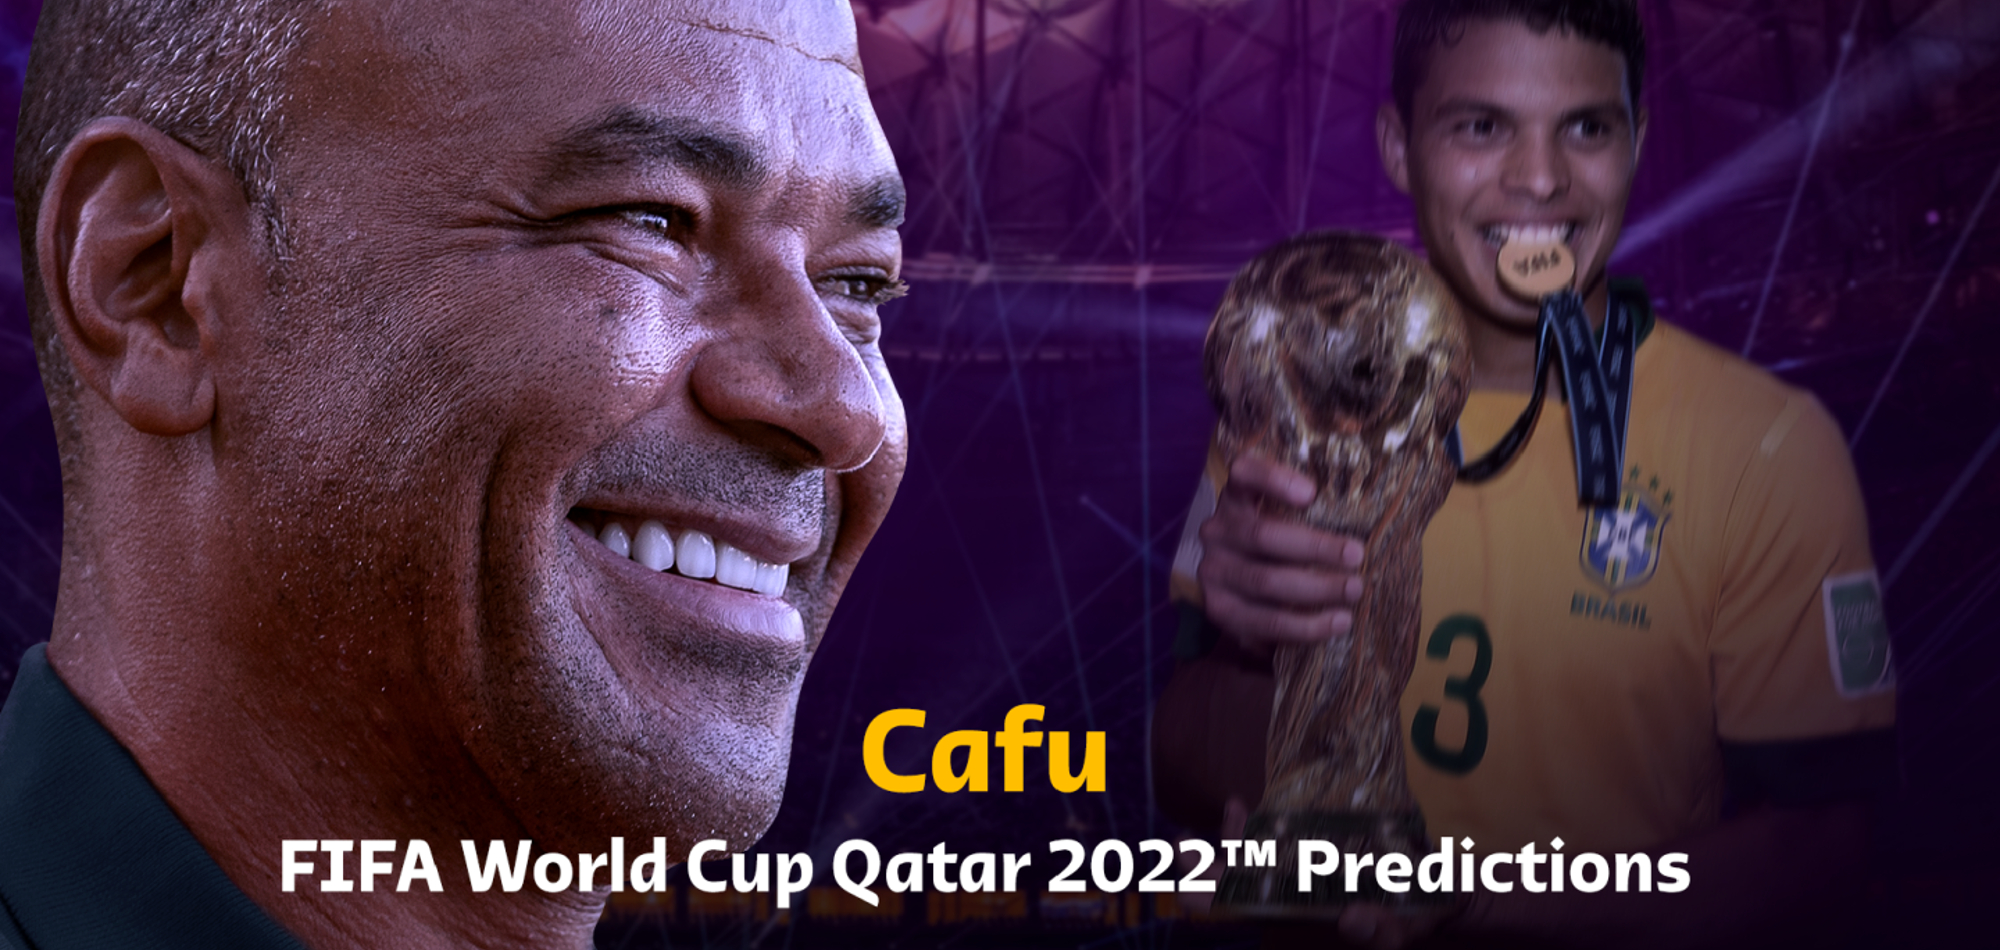 Cafu: Brazil will lift this year’s World Cup and Qatar will make the quarter-finals